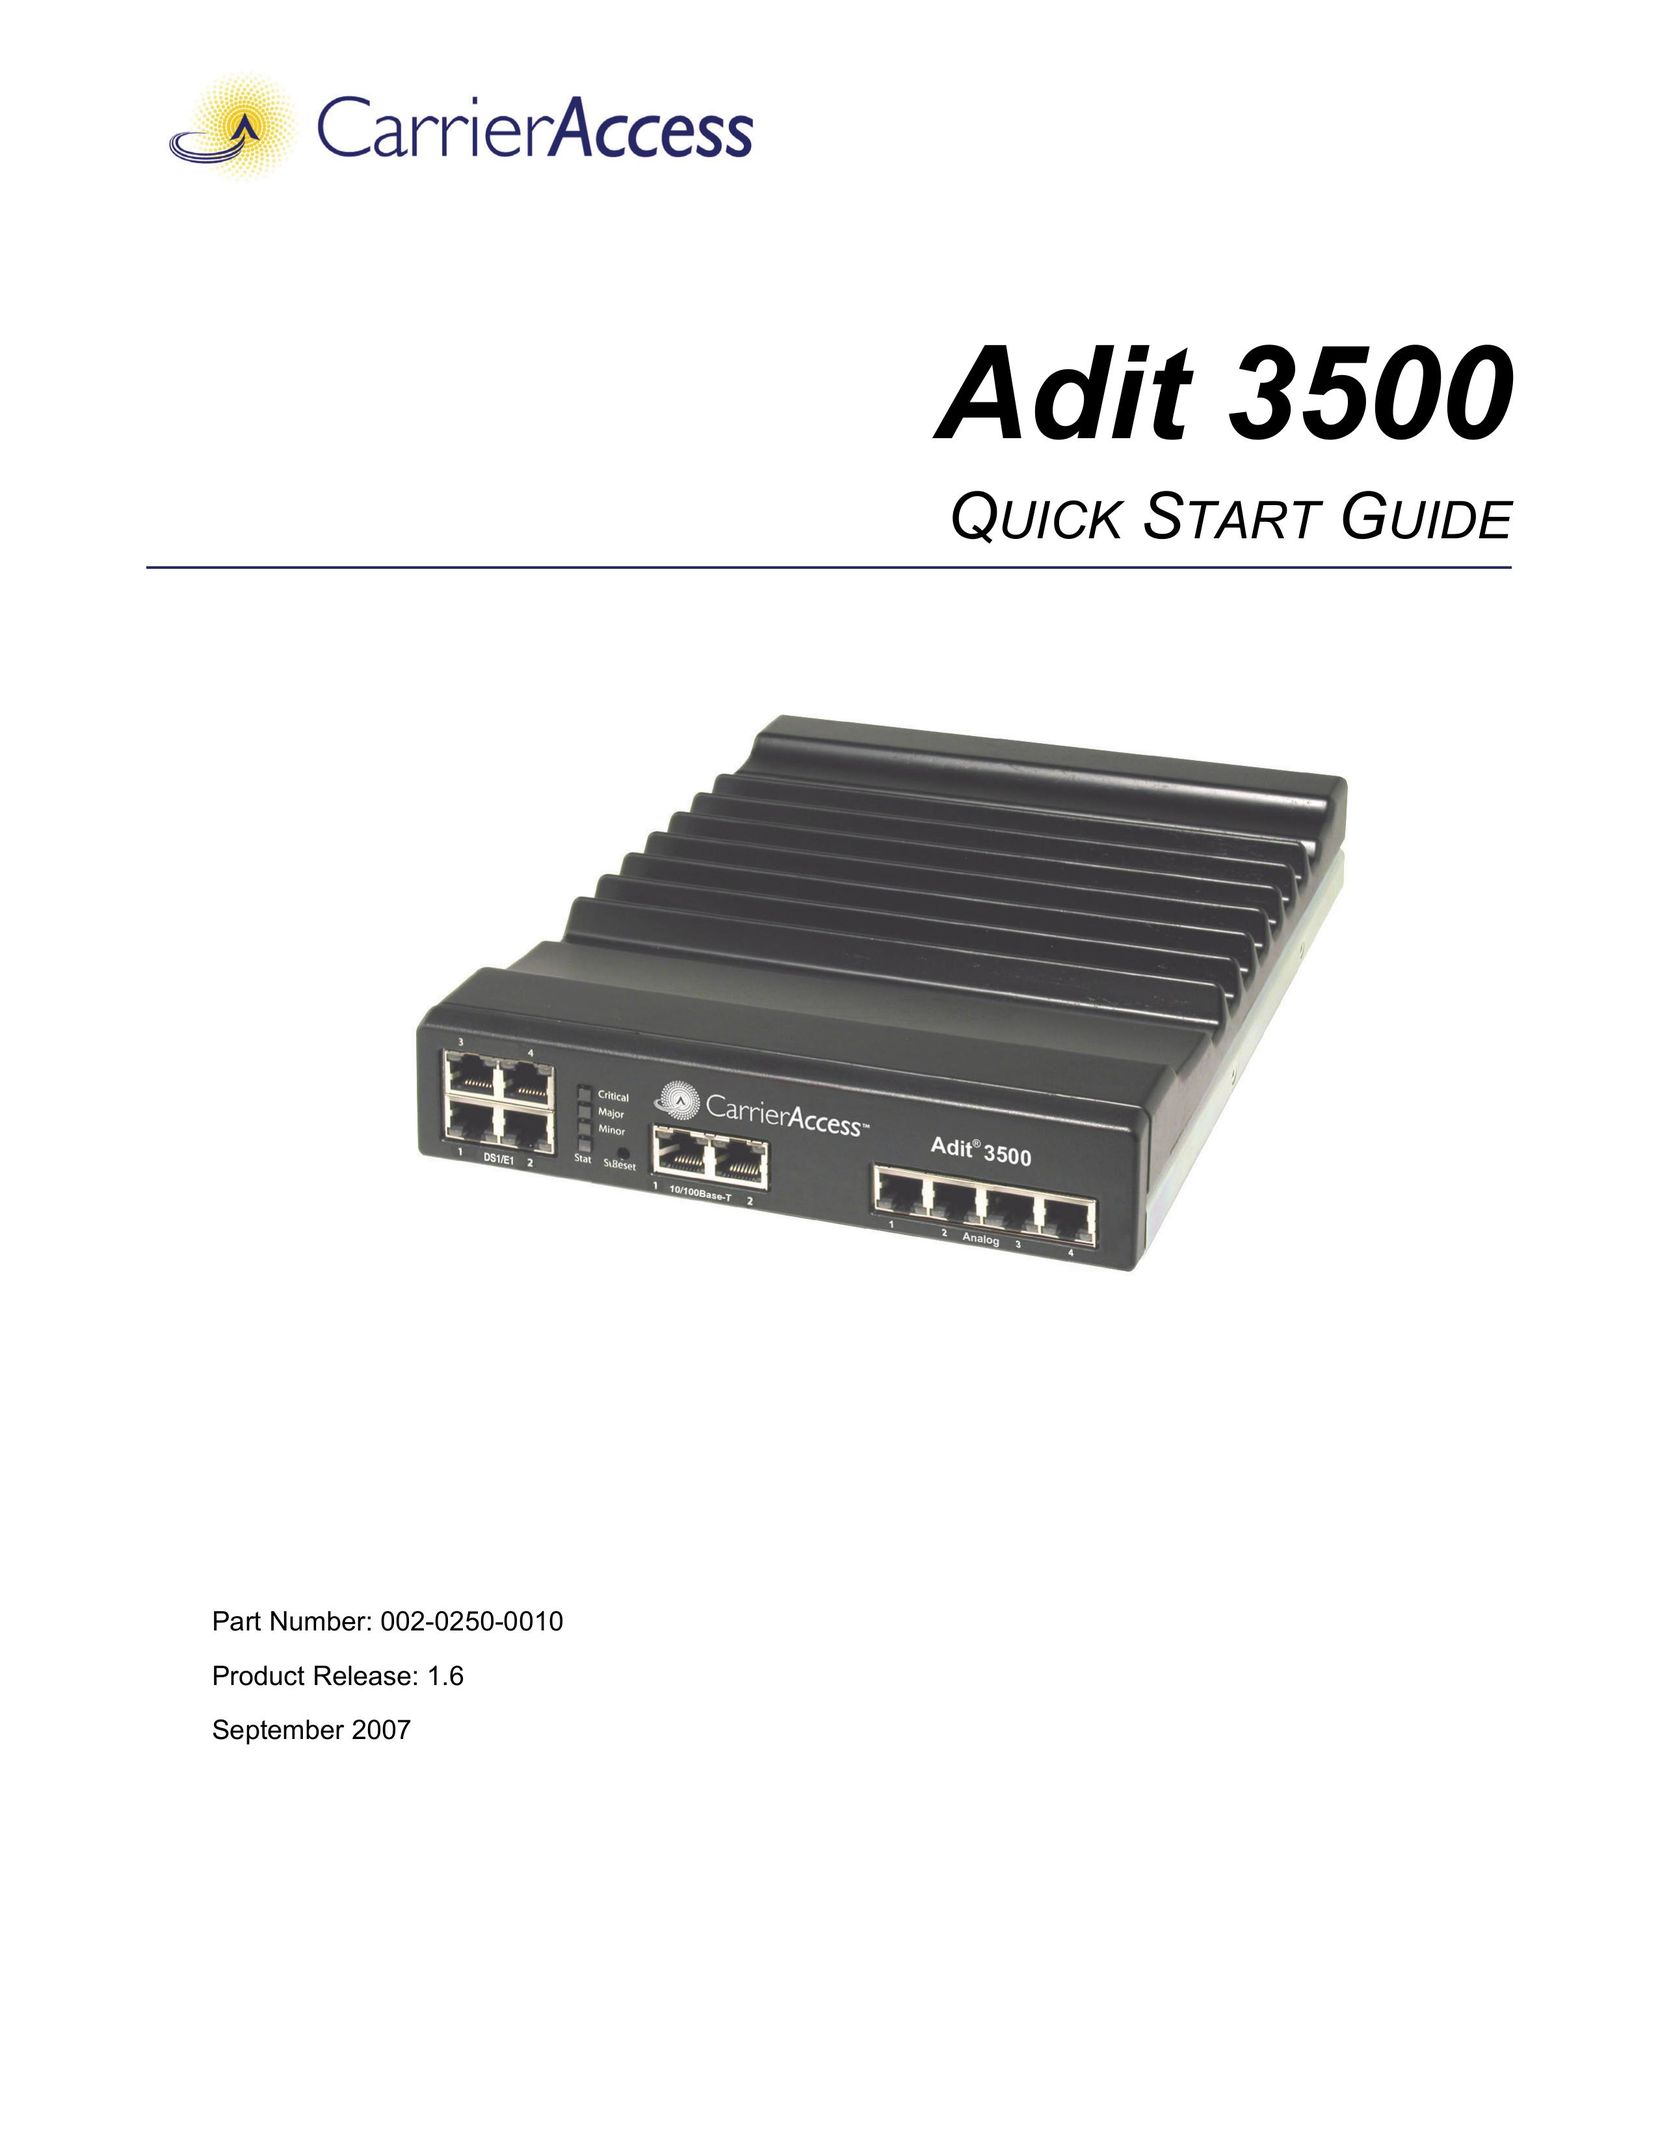 Carrier Access Adit 3500 Network Card User Manual